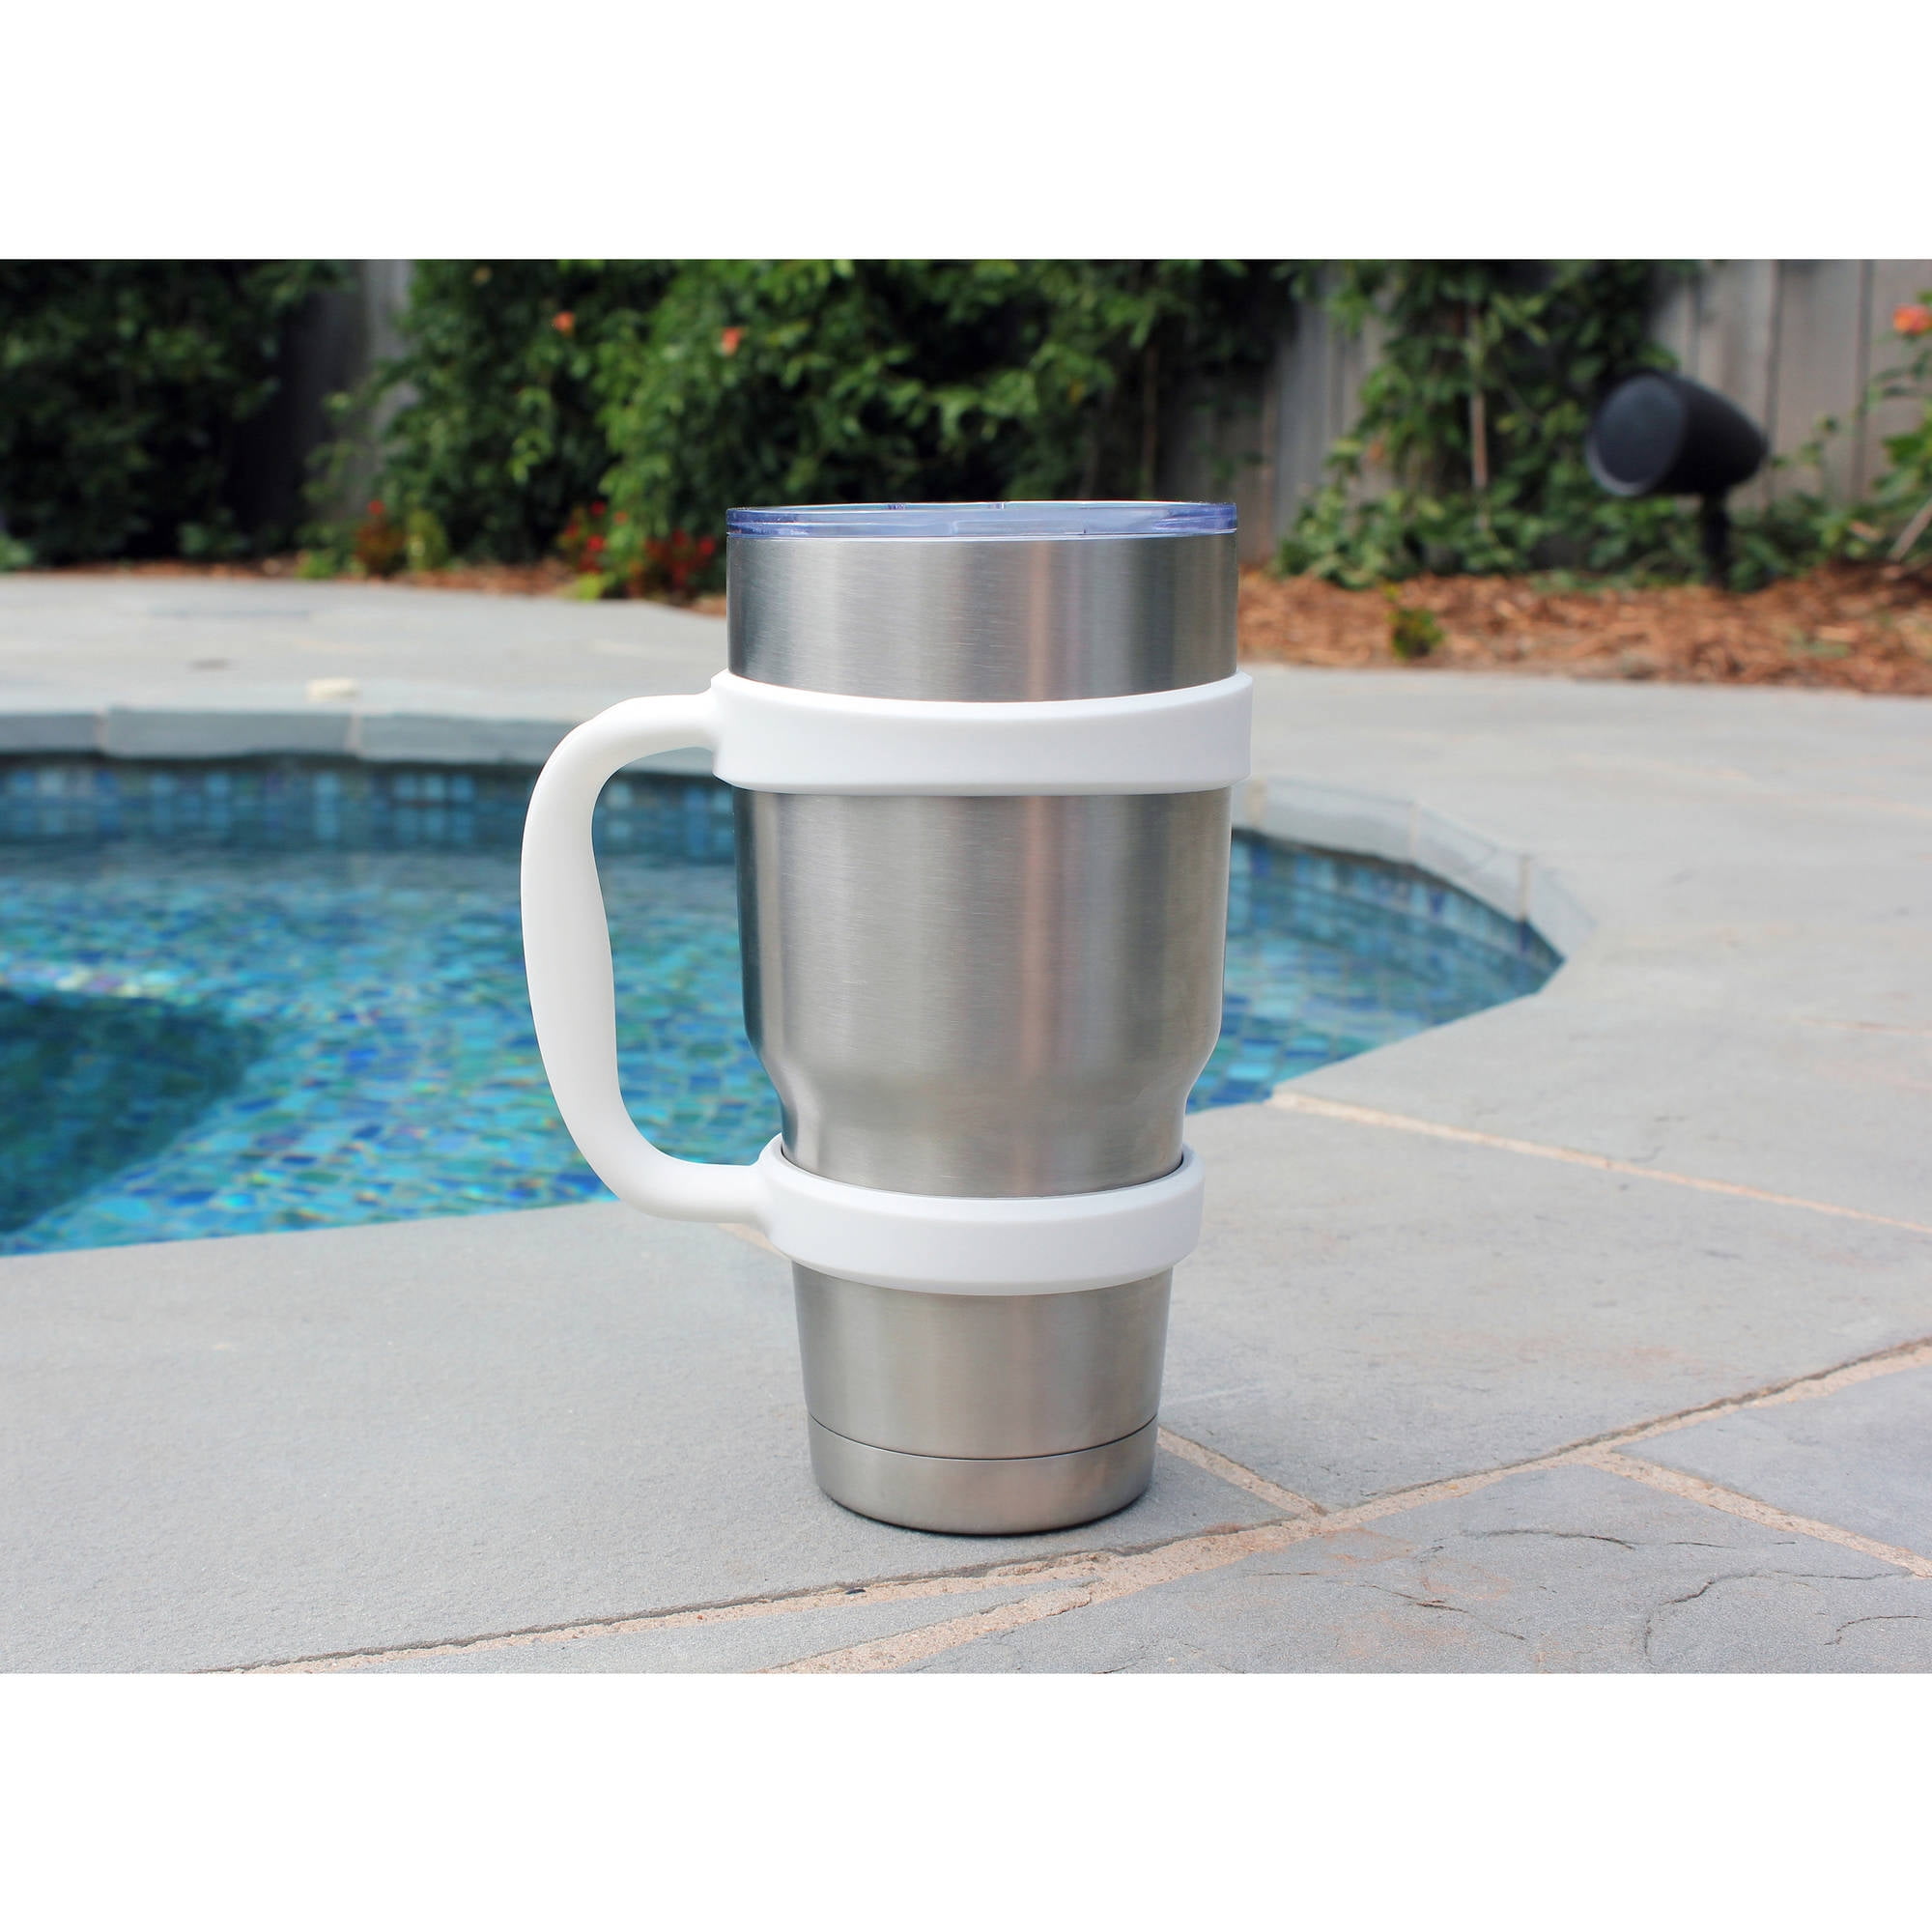 Grip-It YETI Tumbler Cup Handle for 30oz Rambler - Lightweight, Spill Proof  Grip For RTIC Cooler Sta…See more Grip-It YETI Tumbler Cup Handle for 30oz